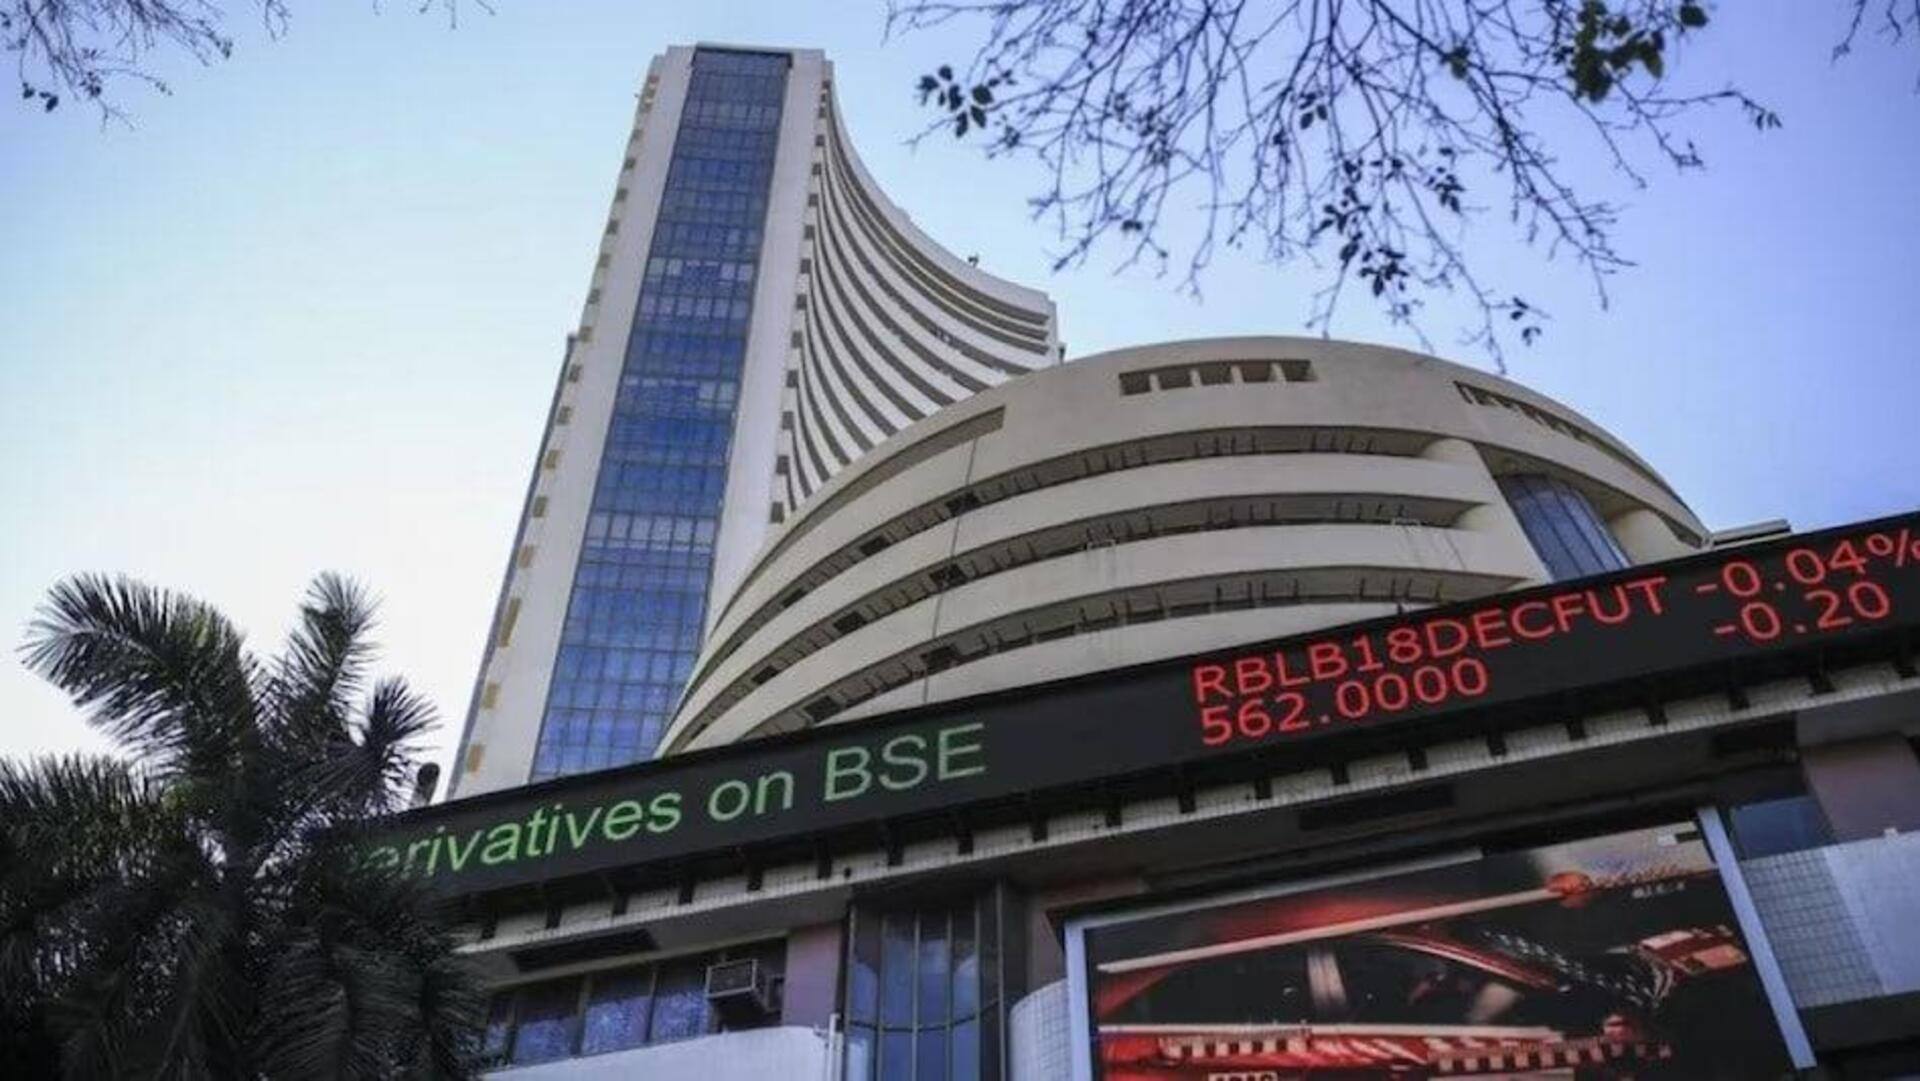 Jefferies initiates BSE coverage with 24% upside projection